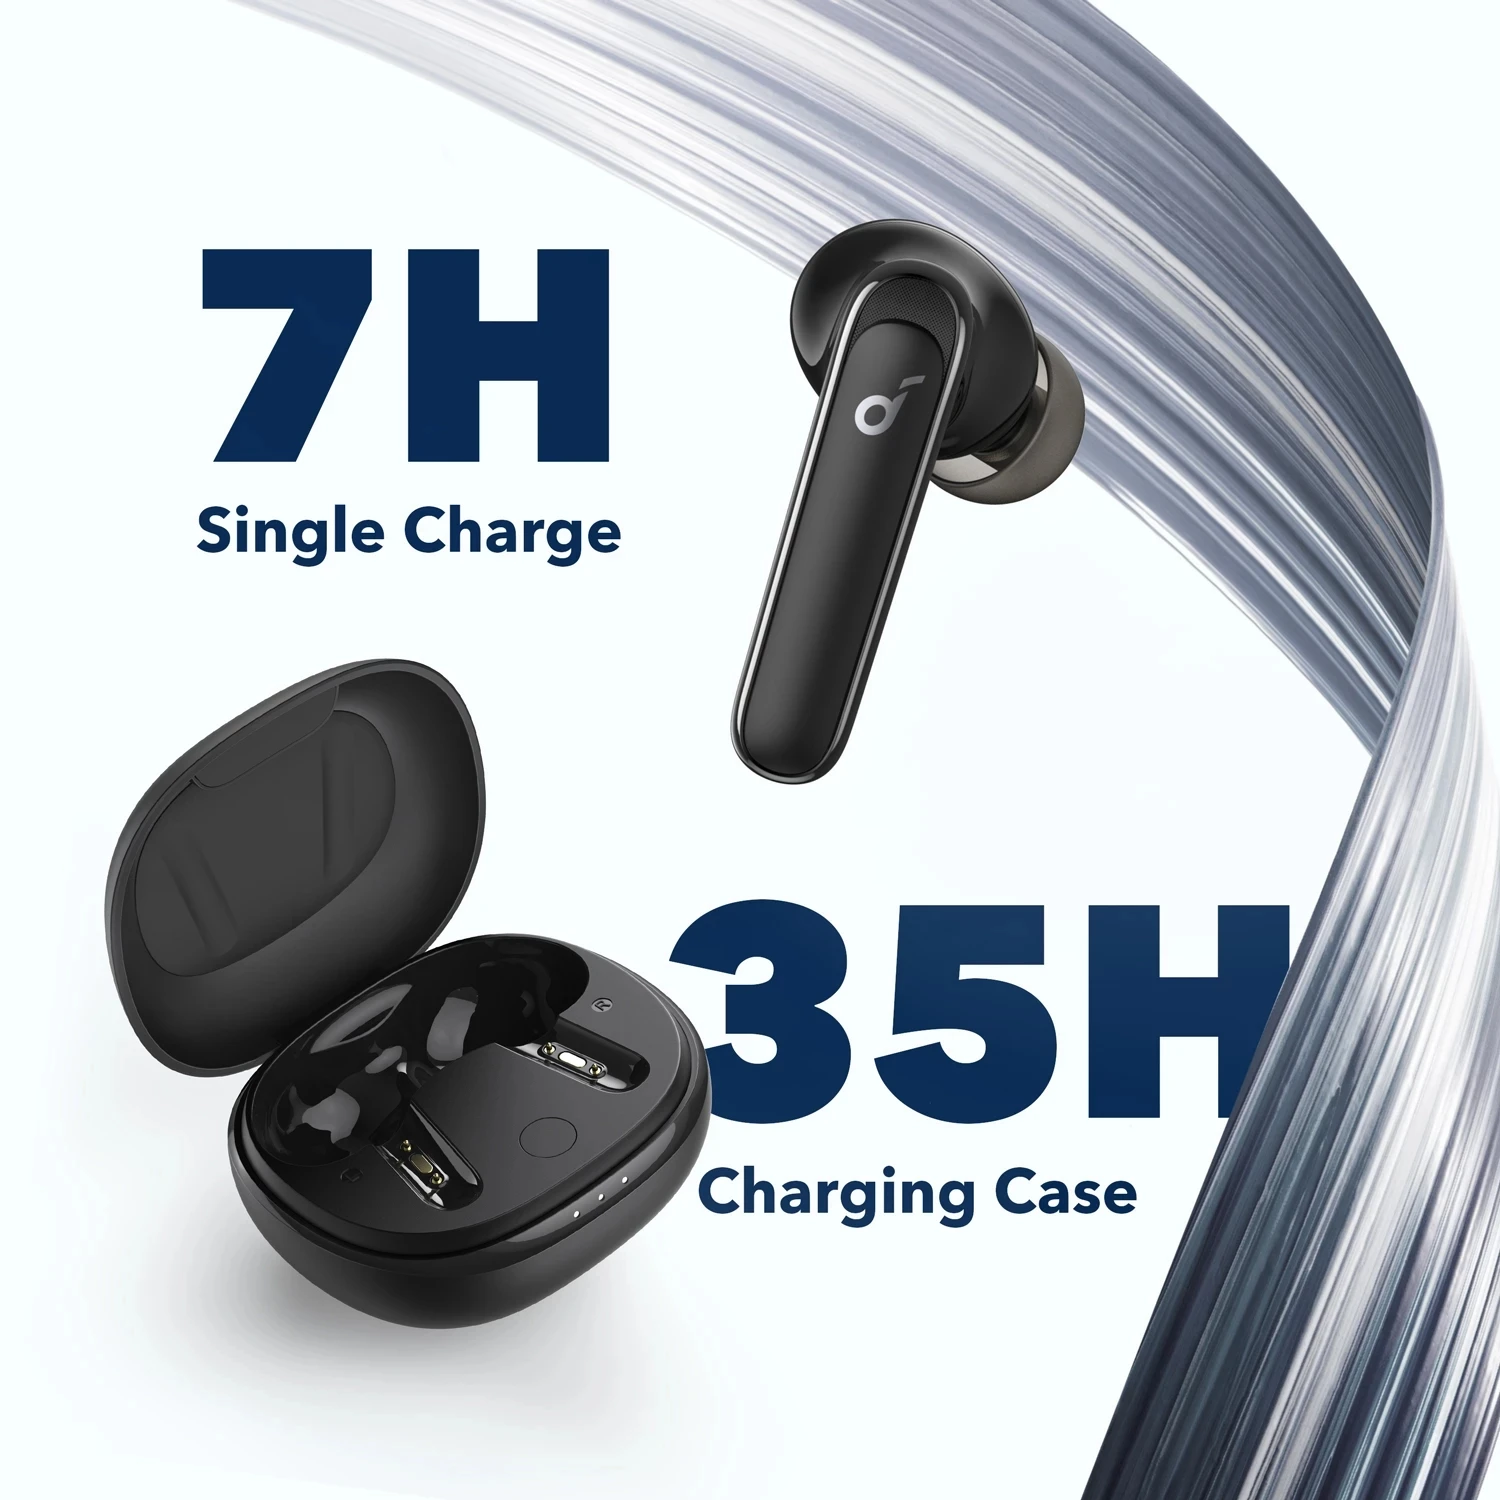 Soundcore Life P3 Tws Noise Cancelling Earbuds By Anker - Buy For 